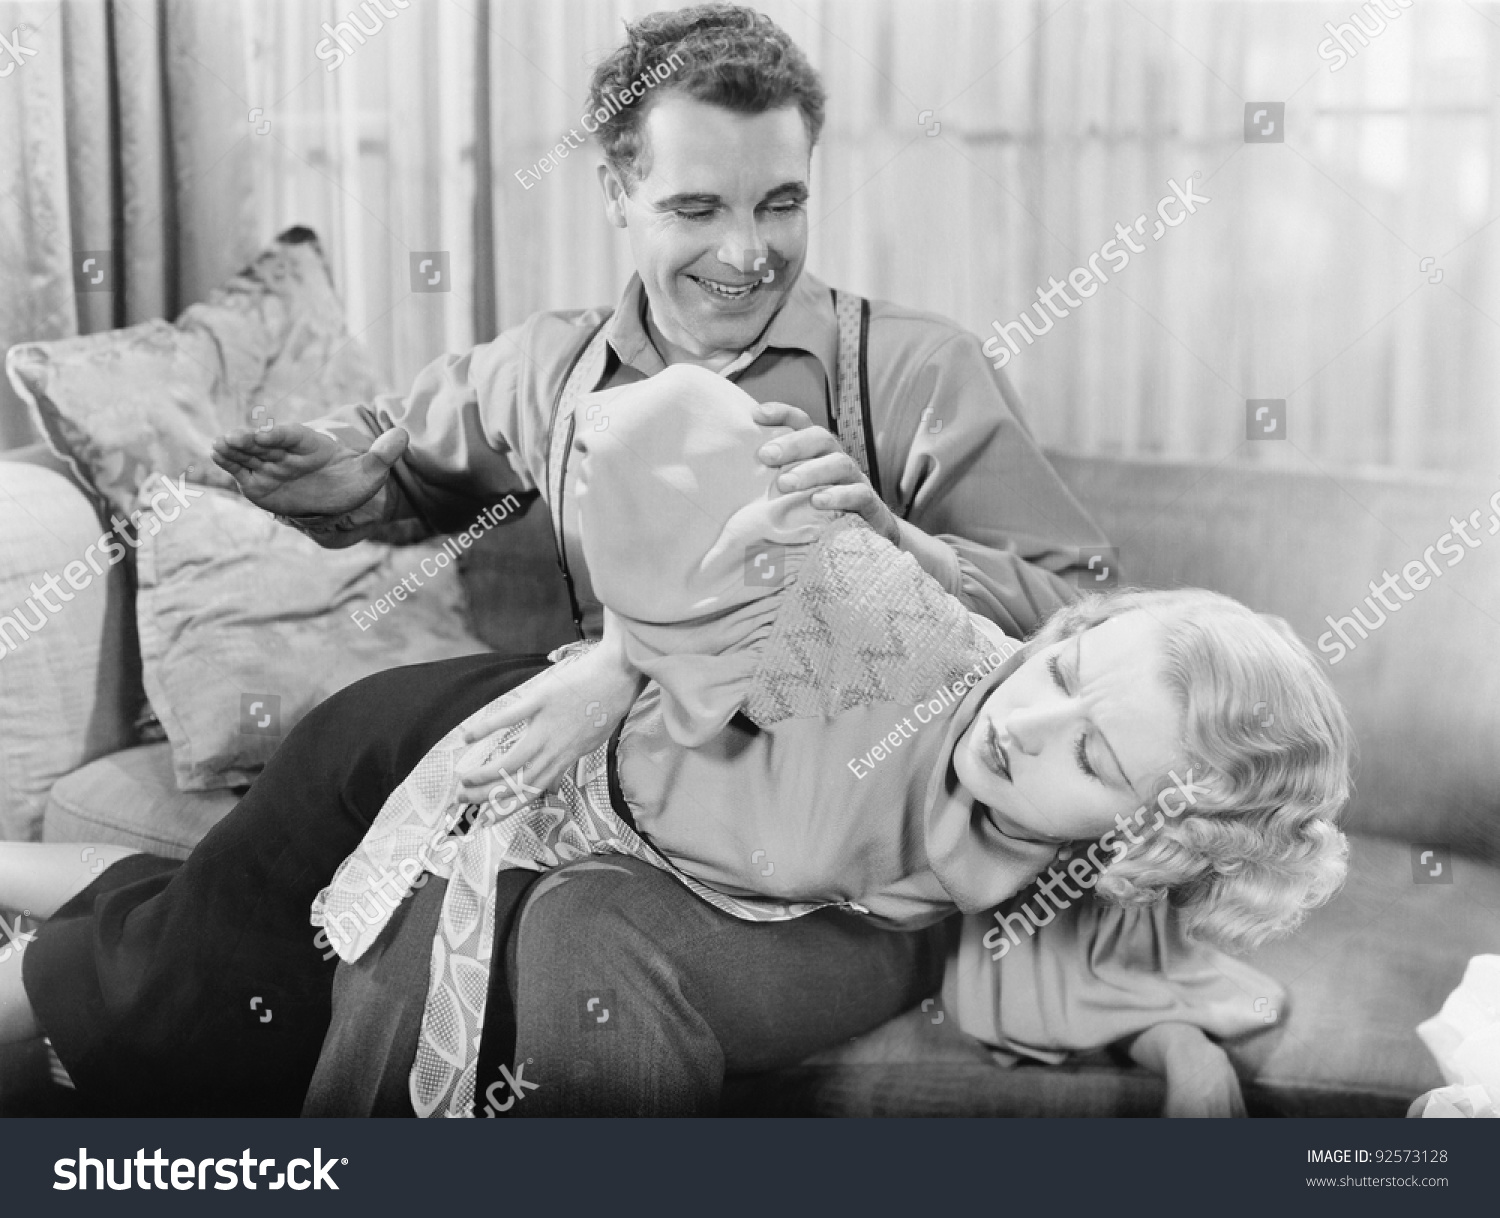 Spanking The Lady At The Door Man Spanking A Woman Stock Photo 92573128 : Shutterstock